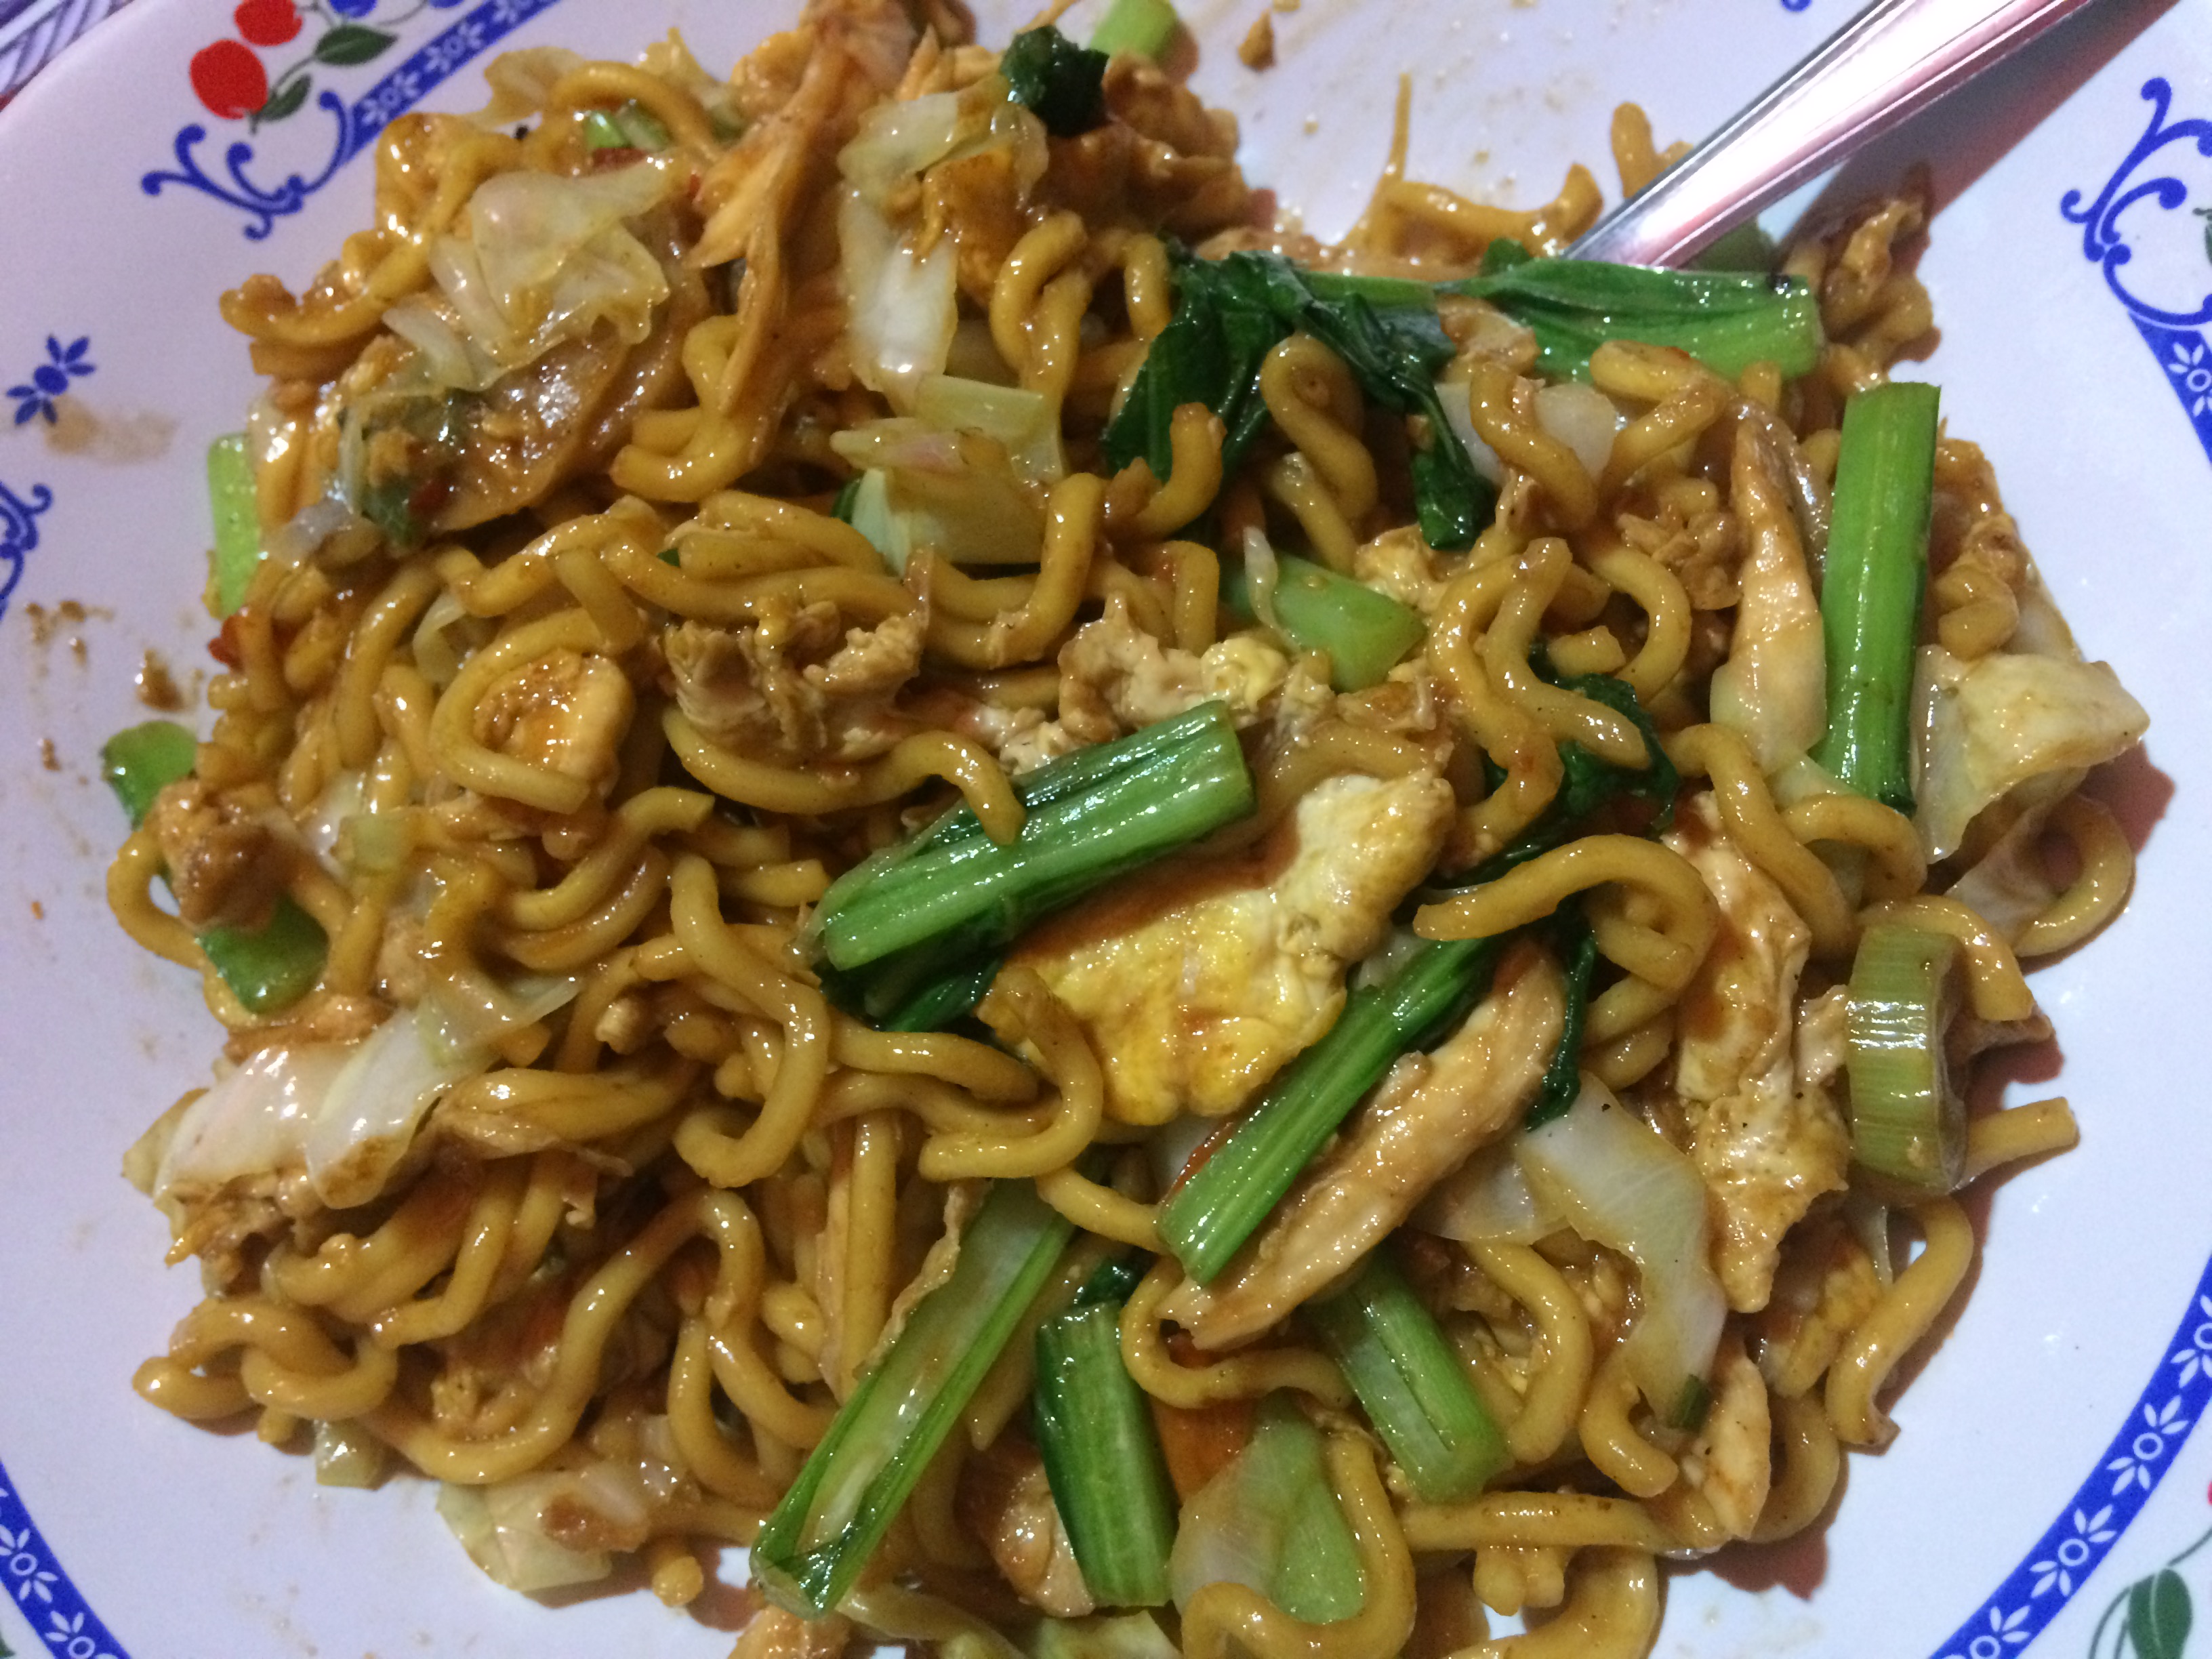 Mie goreng ayam (Fried noodles with chicken).